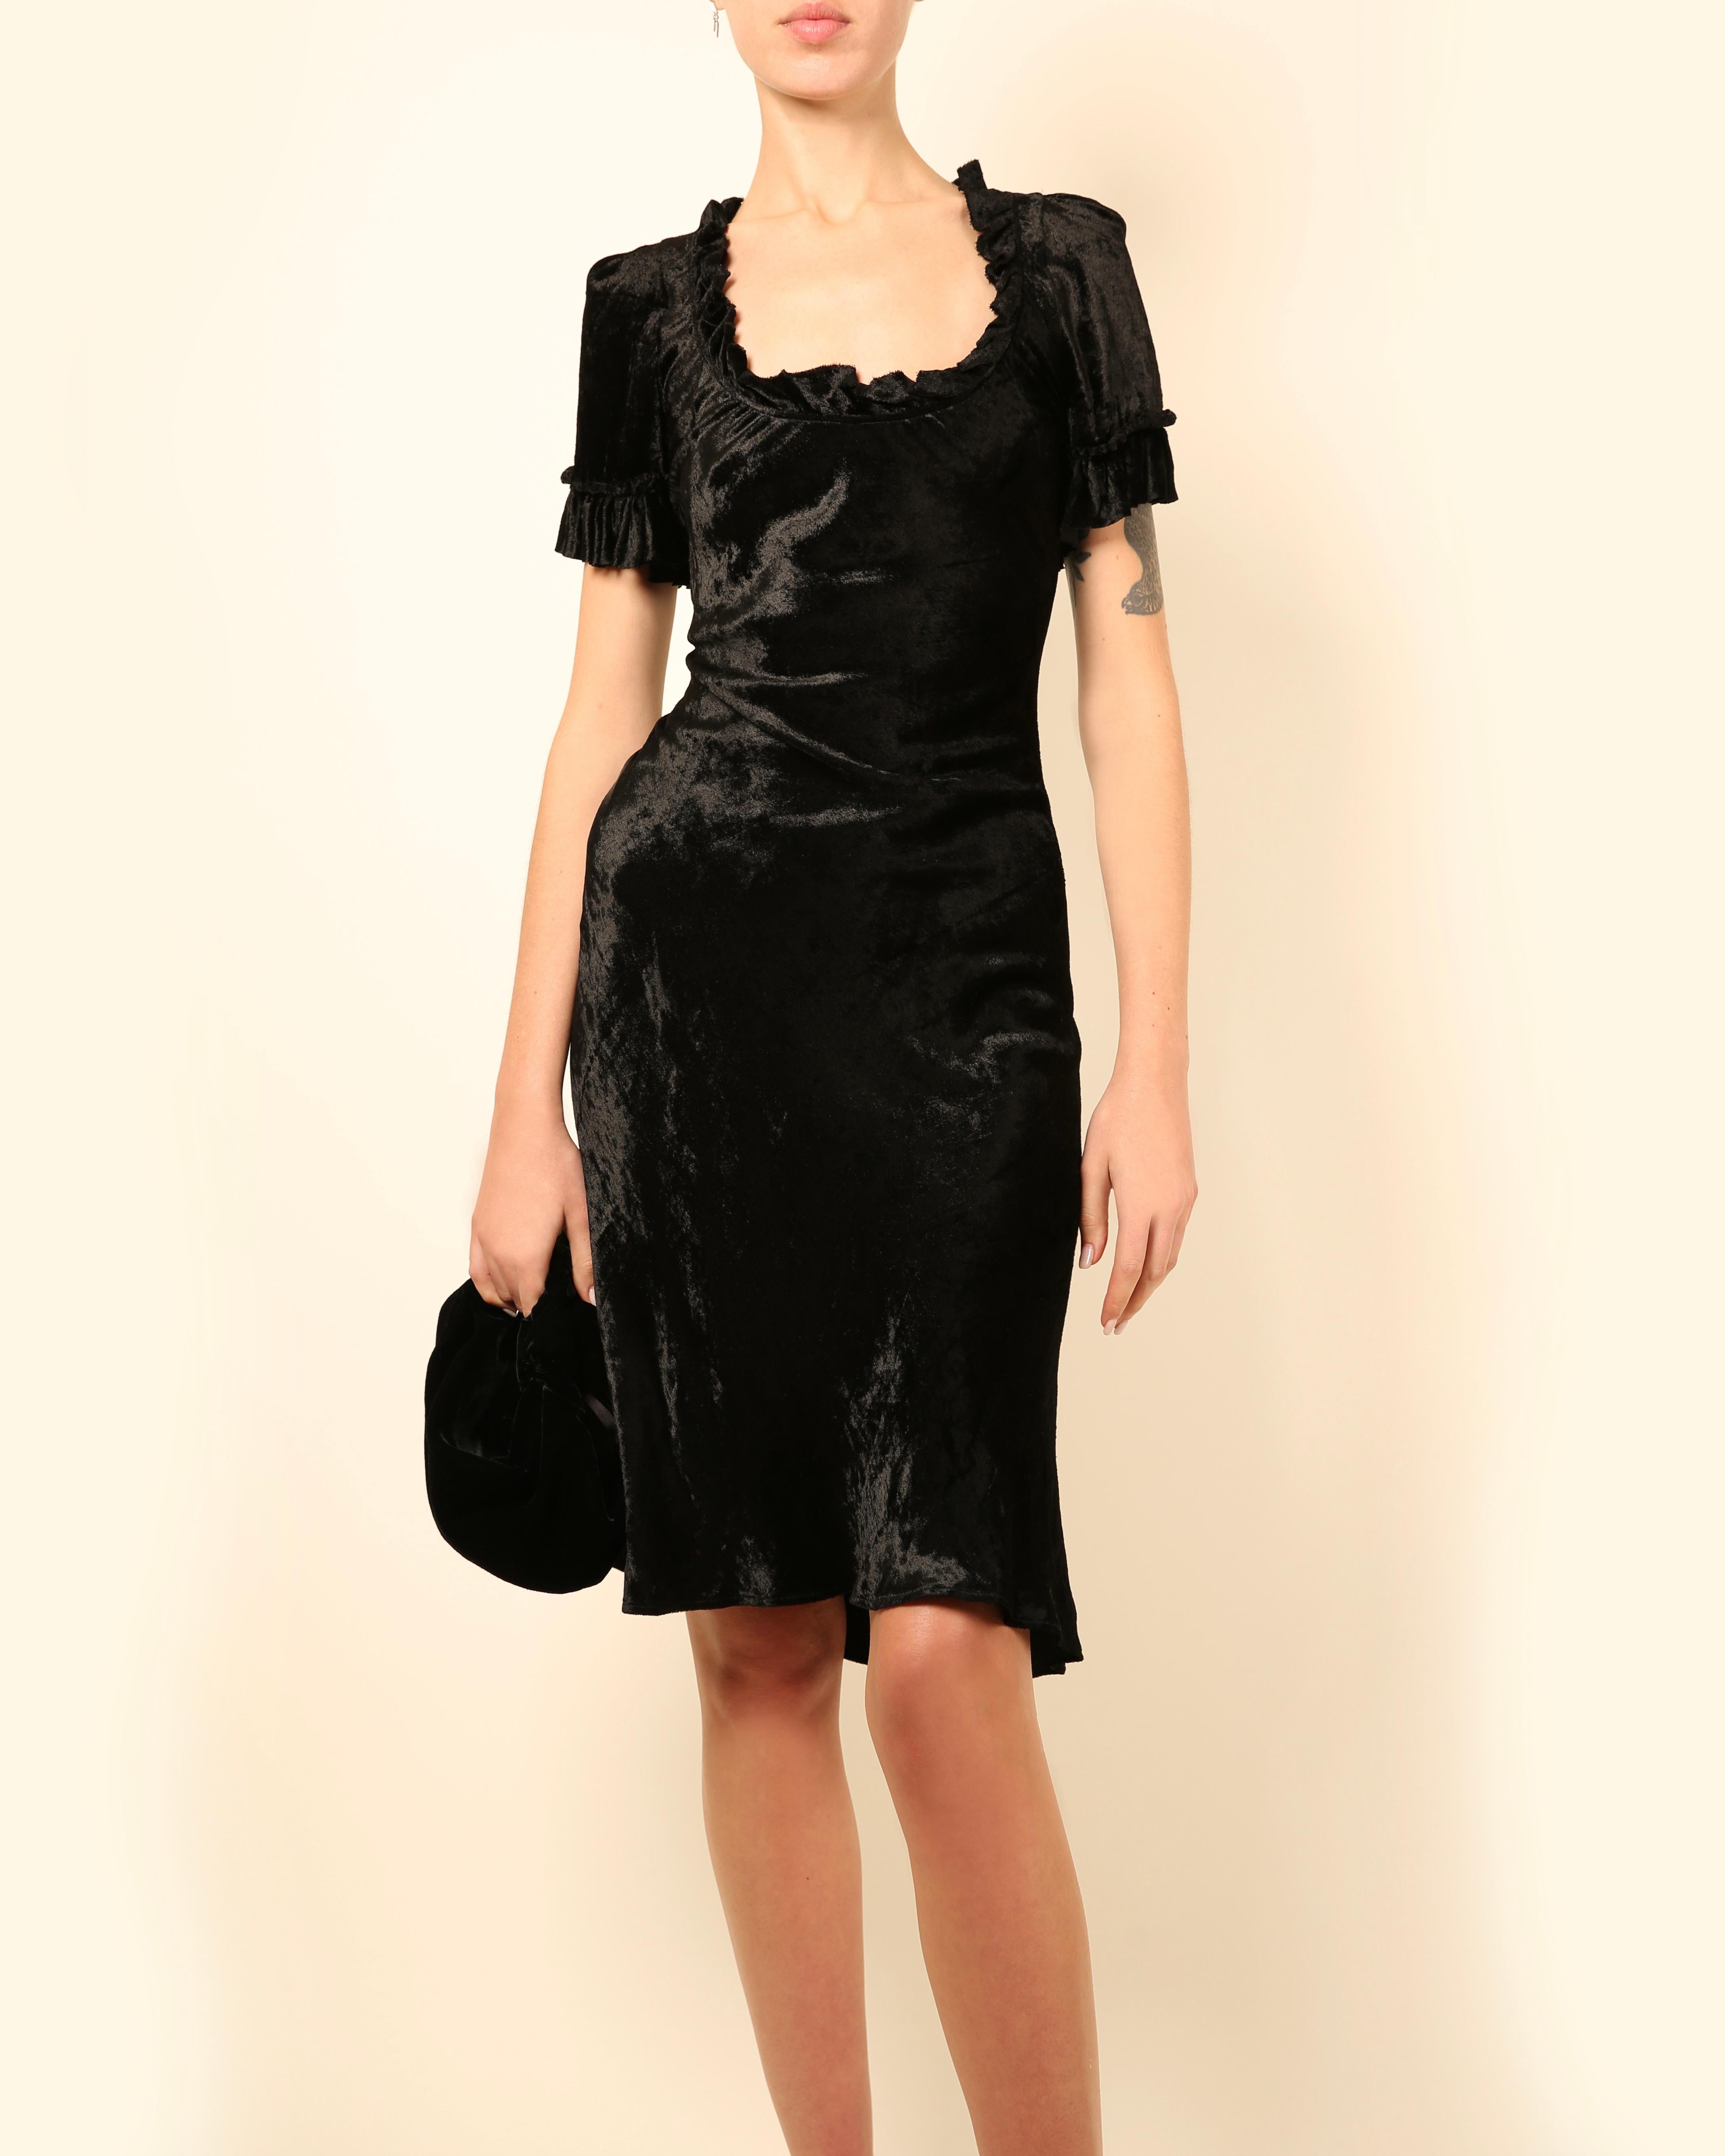 LOVE LALI Vintage

Brock Collection black velvet dress
Square neckline
Short sleeves
Ruffle detail to the neck and sleeves
Knee length
Fitted body with a slight flare to the skirt
No zip

Size:
US 4 - however I believe this has been altered to fit